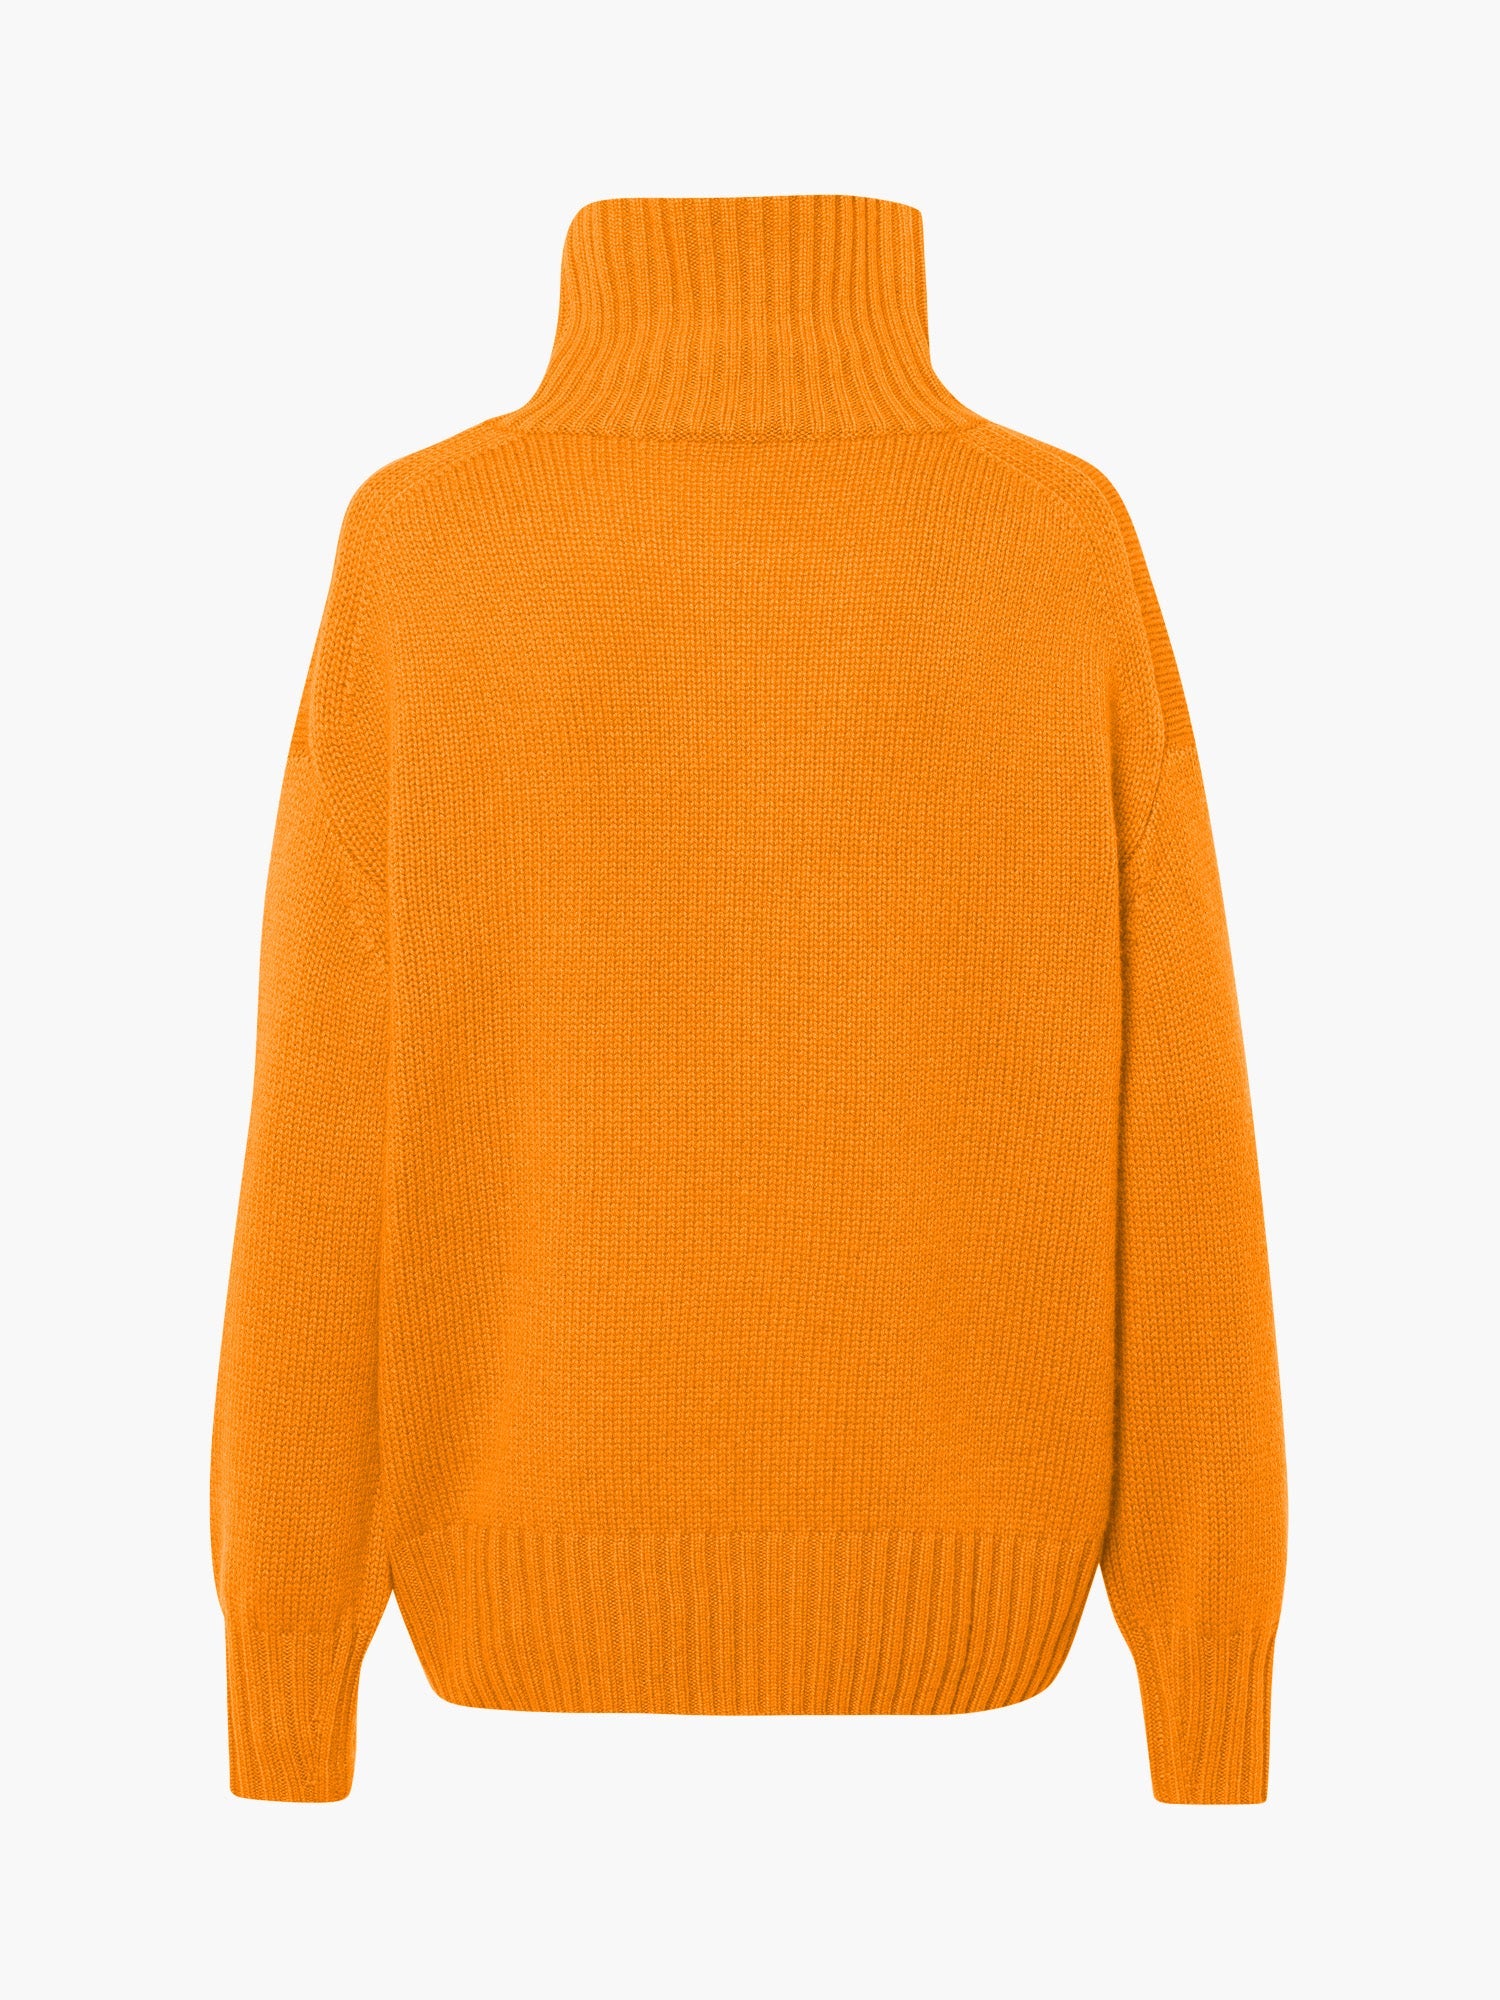 FTC-Cashmere-OUTLET-SALE-Pullover-Highneck-Strick-ARCHIVE-COLLECTION-2.jpg